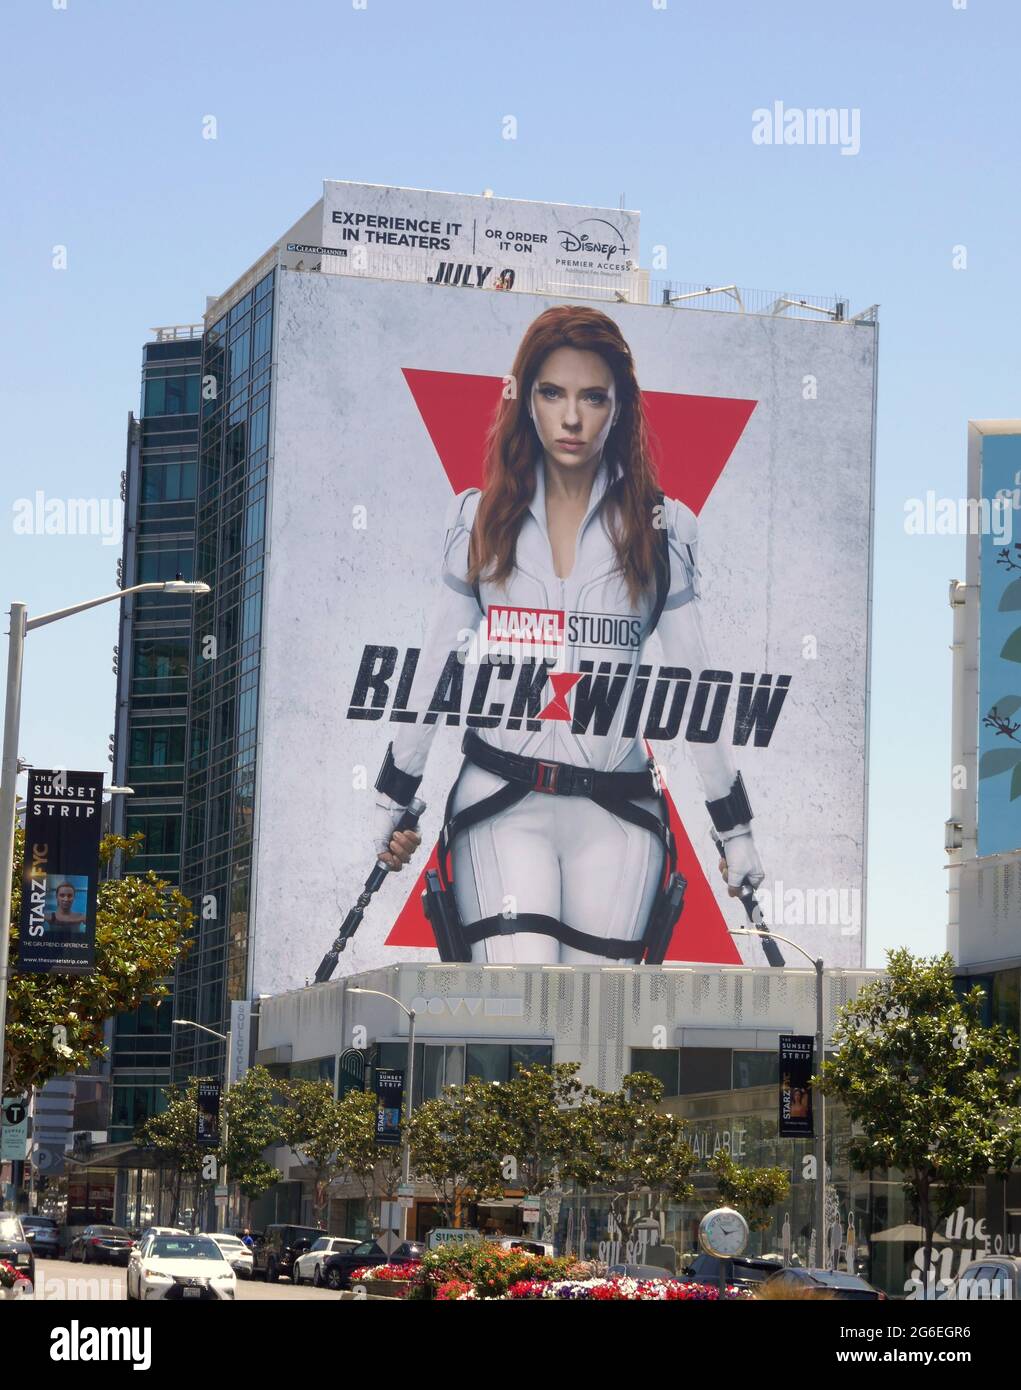 Los Angeles, California, USA 2nd July 2021 A general view of atmosphere of Disney Marvel Studios 'Black Widow' Scarlett Johansson Billboard during Coronavirus Covid-19 pandemic on July 2, 2021 in Los Angeles, California, USA. Photo by Barry King/Alamy Stock Photo Stock Photo